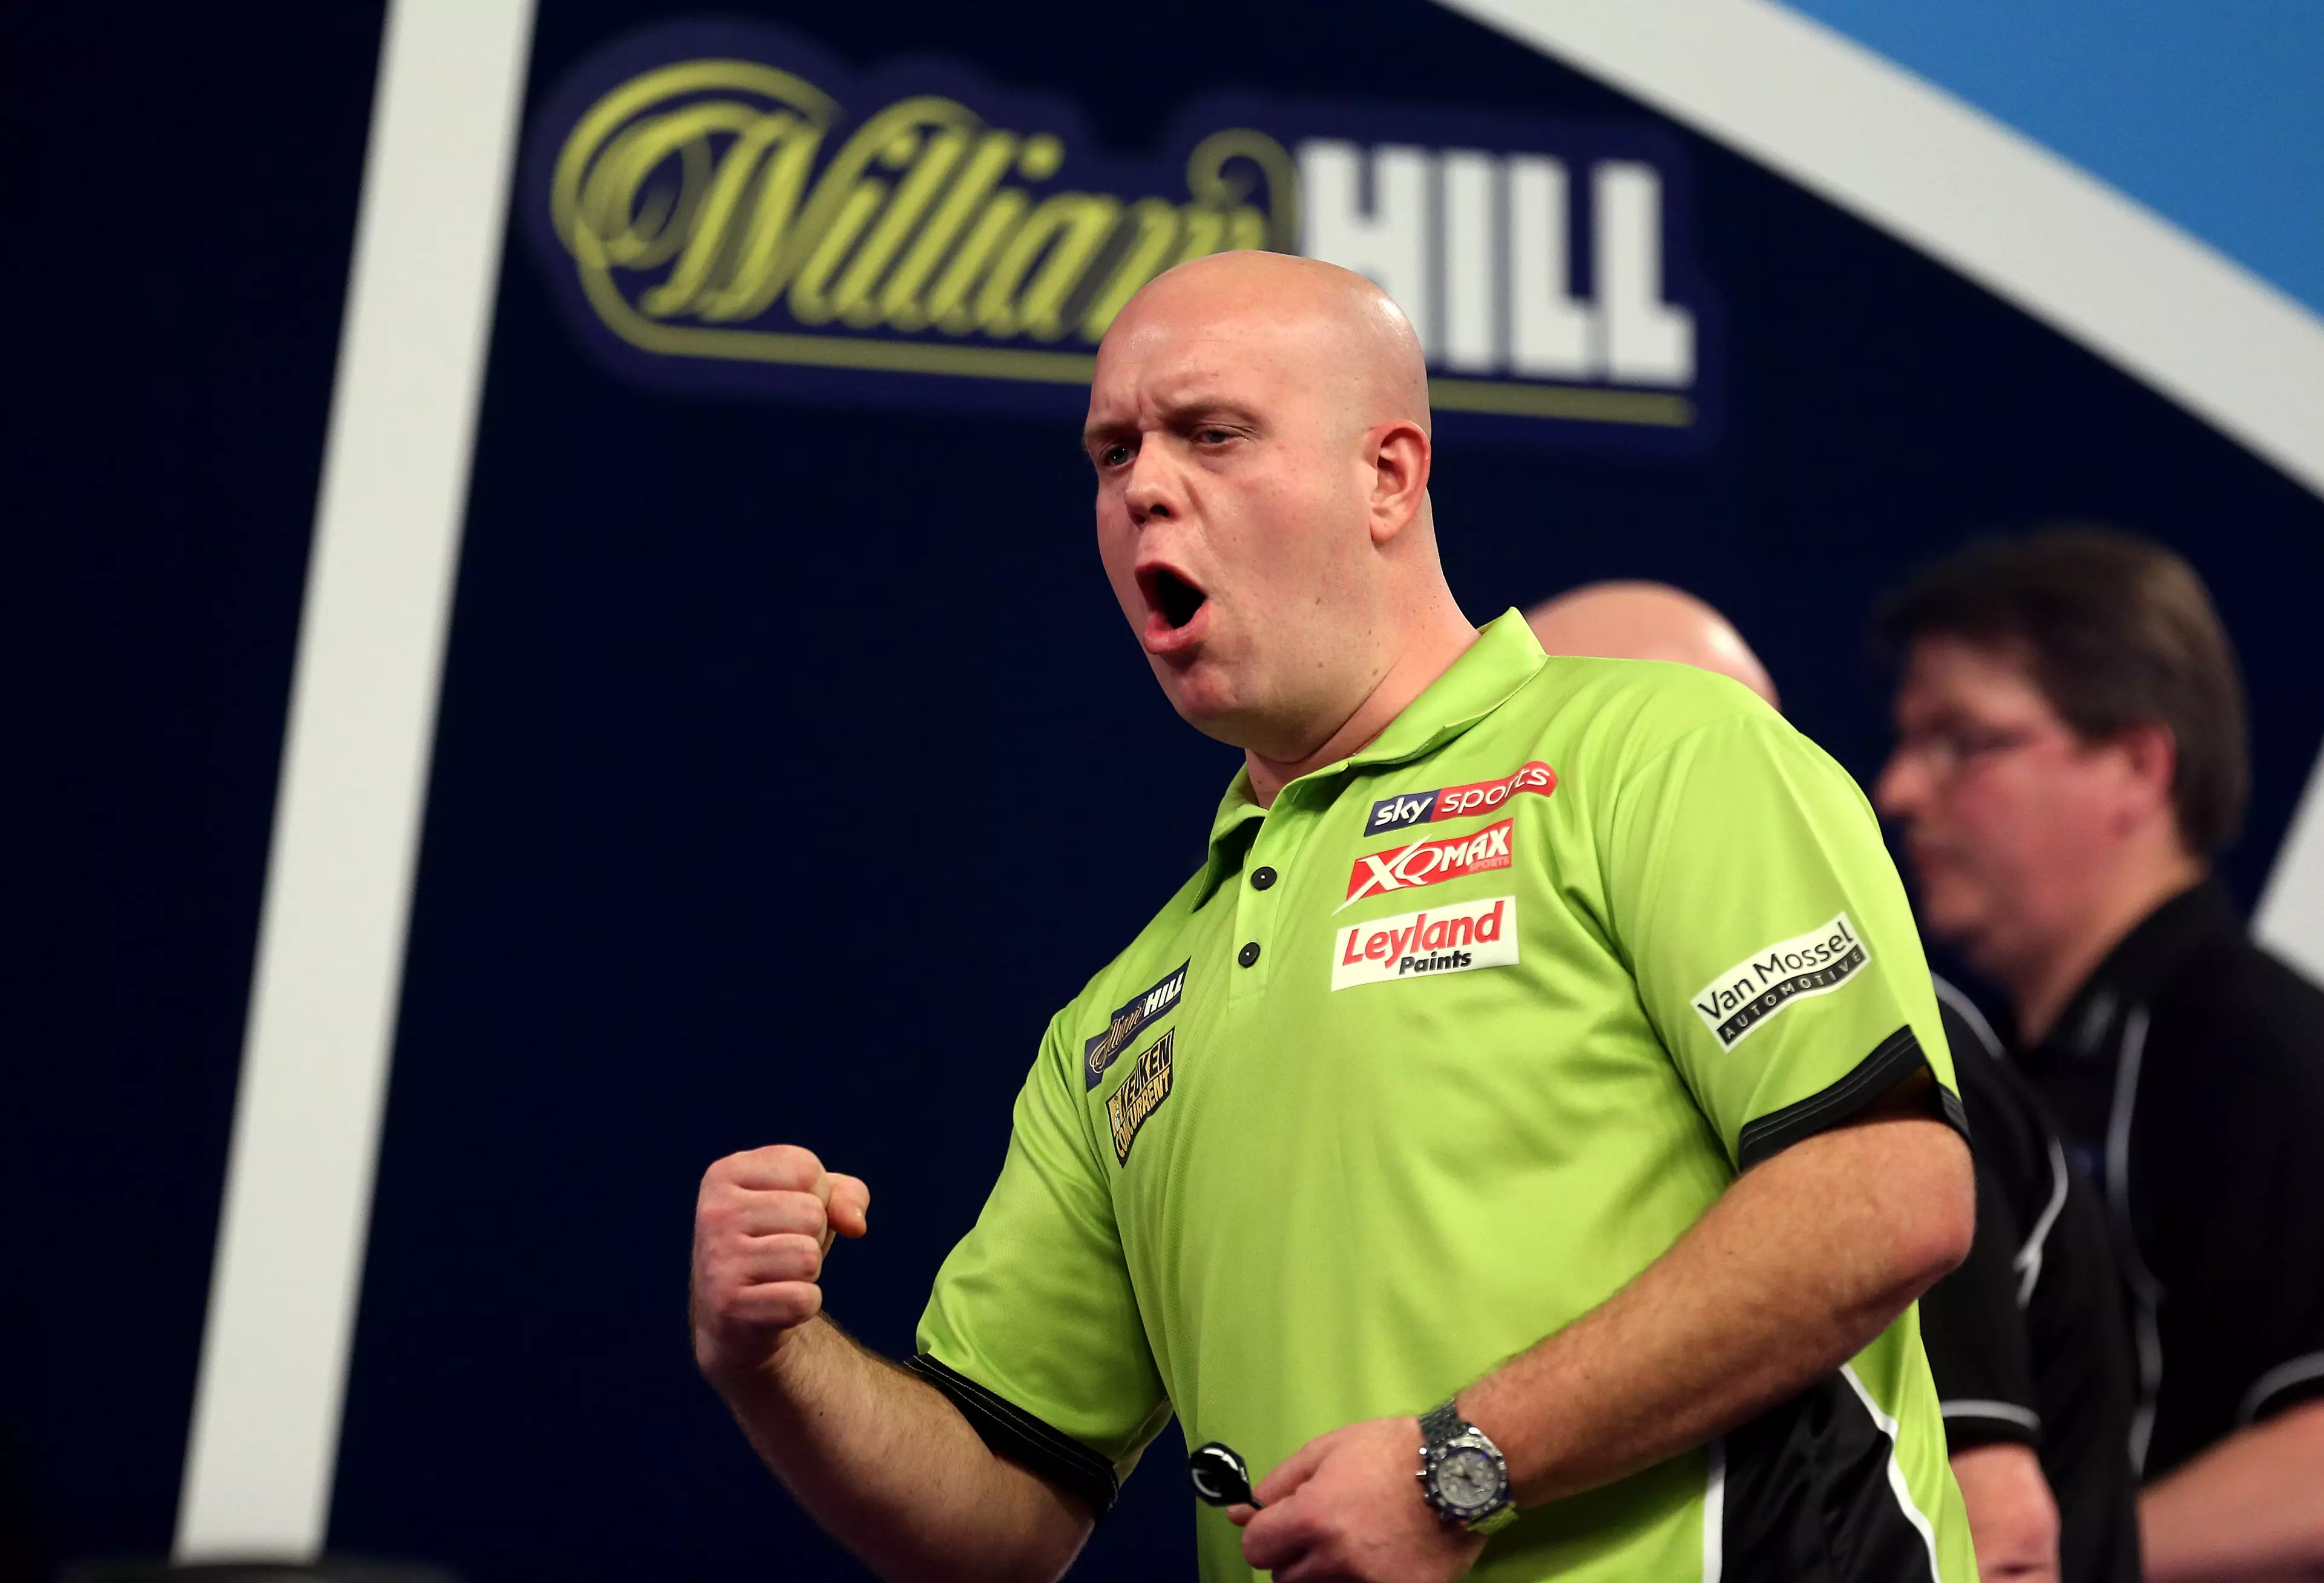 Michael Van Gerwen’s Opening Leg Just Shows He’s On Another Level